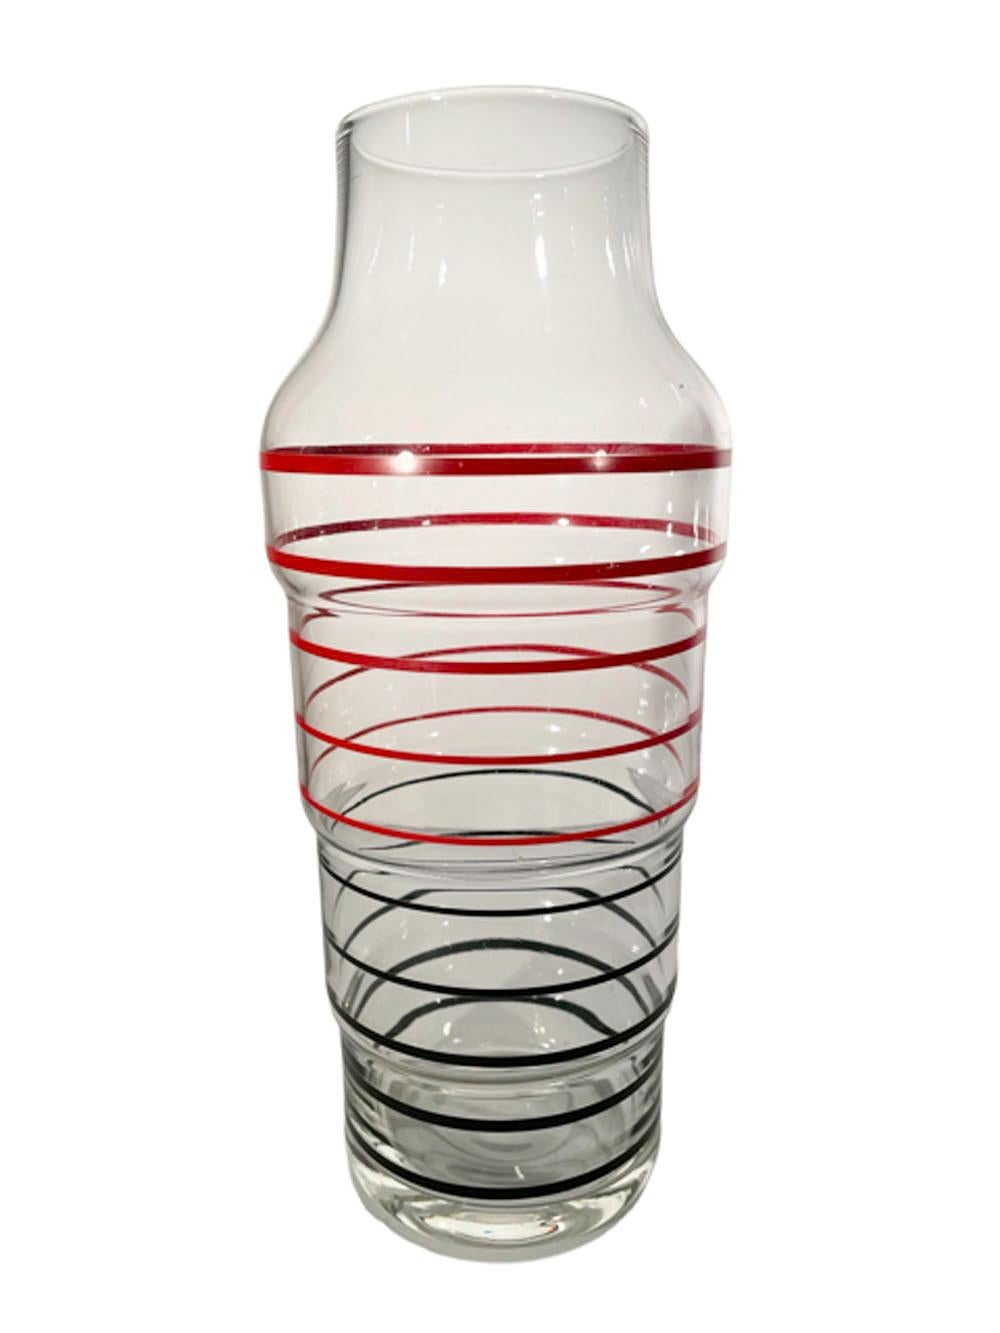 American Art Deco Philco Radio Bar Type Cocktail Shaker W/ Red and Black Line Decoration For Sale